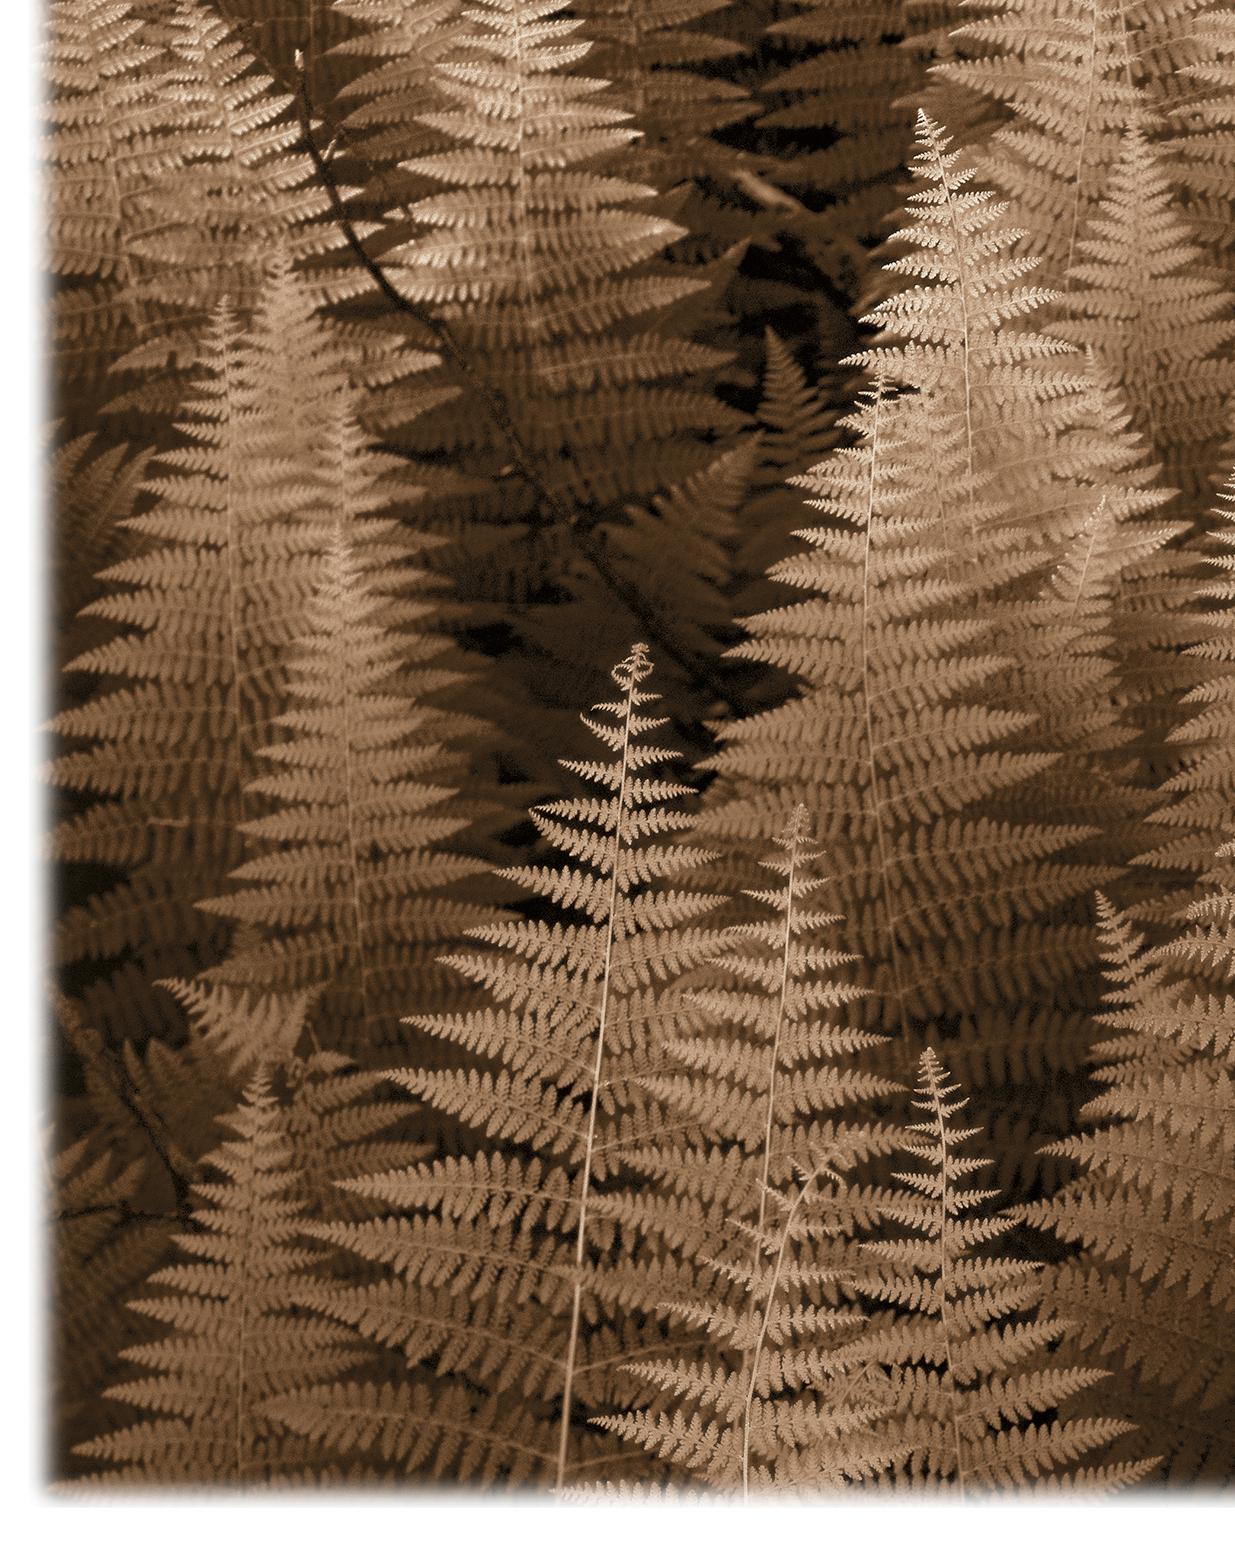 Ferns No. 2 (Sepia-Tone Botanical Still-Life Photograph on Watercolor Paper) For Sale 2